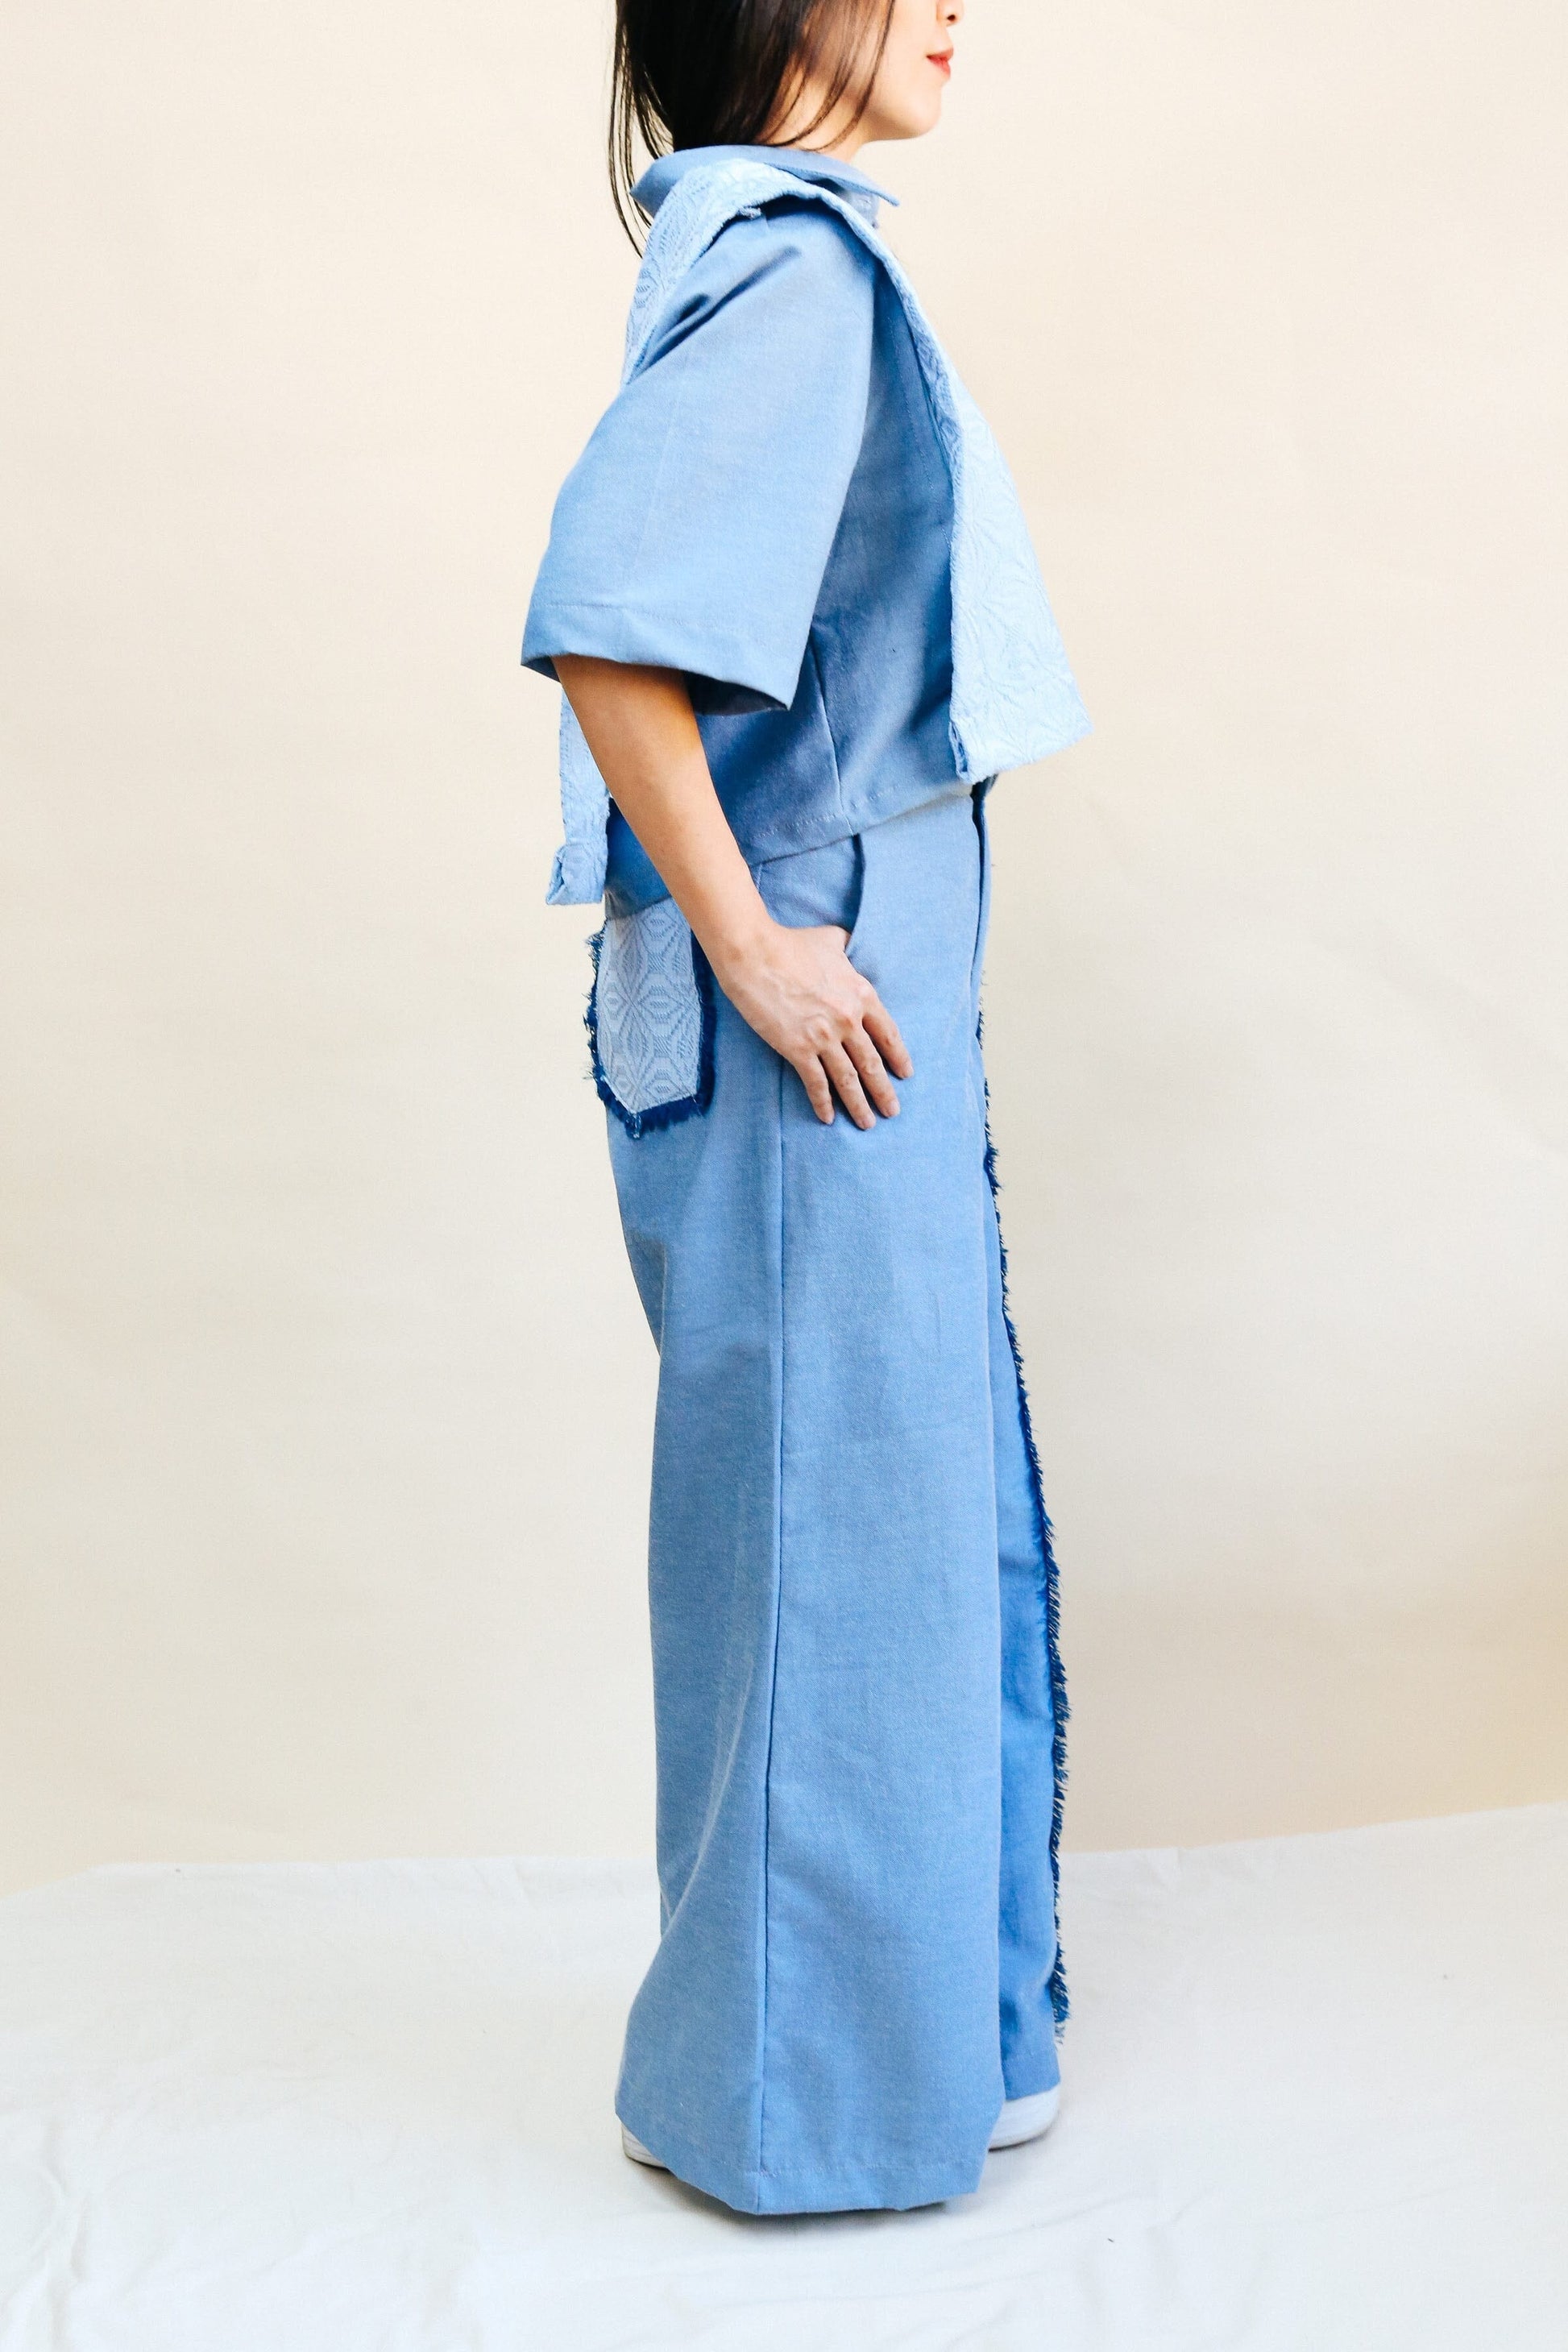 [Ready Today] Striped Wide-Legged Pants Chambray & Binetwagan Fashion Rags2Riches